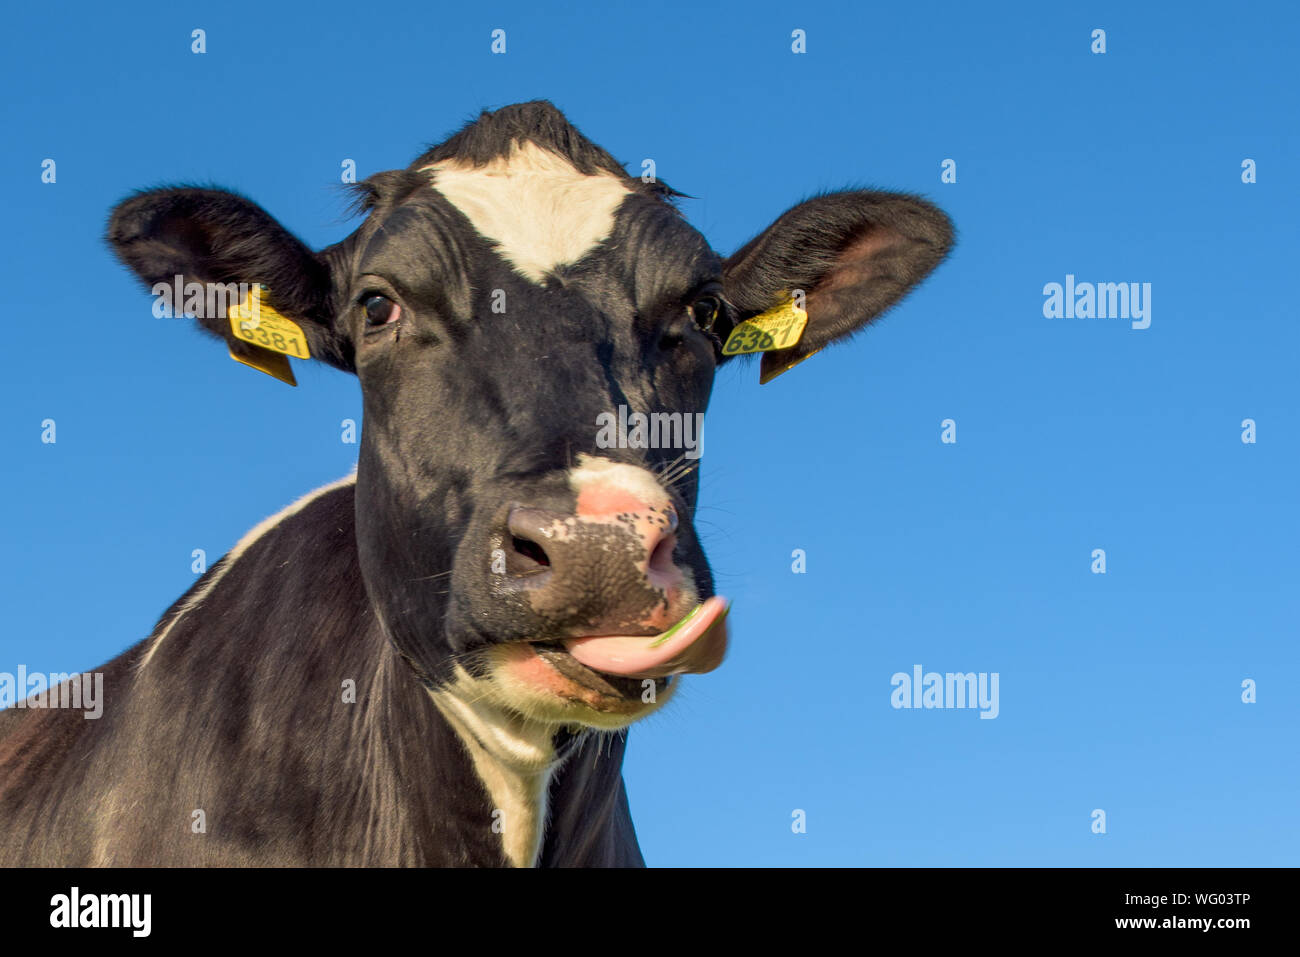 Portrait Of Cow Sticking Out Tongue Against Clear Blue Sky Stock Photo